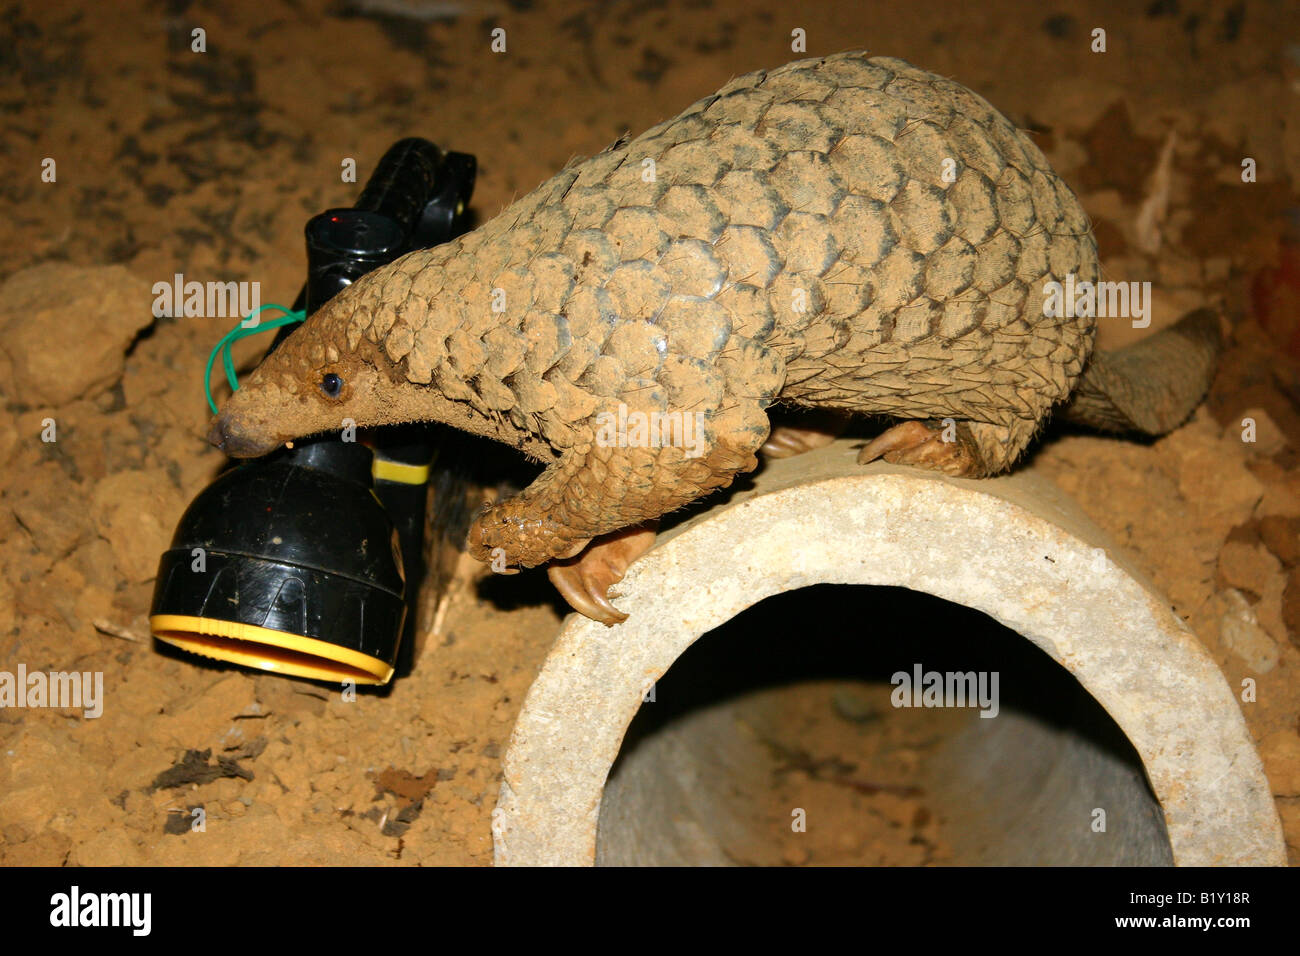 Captive pangolin walking over concrete tunnel in front of torch Stock Photo